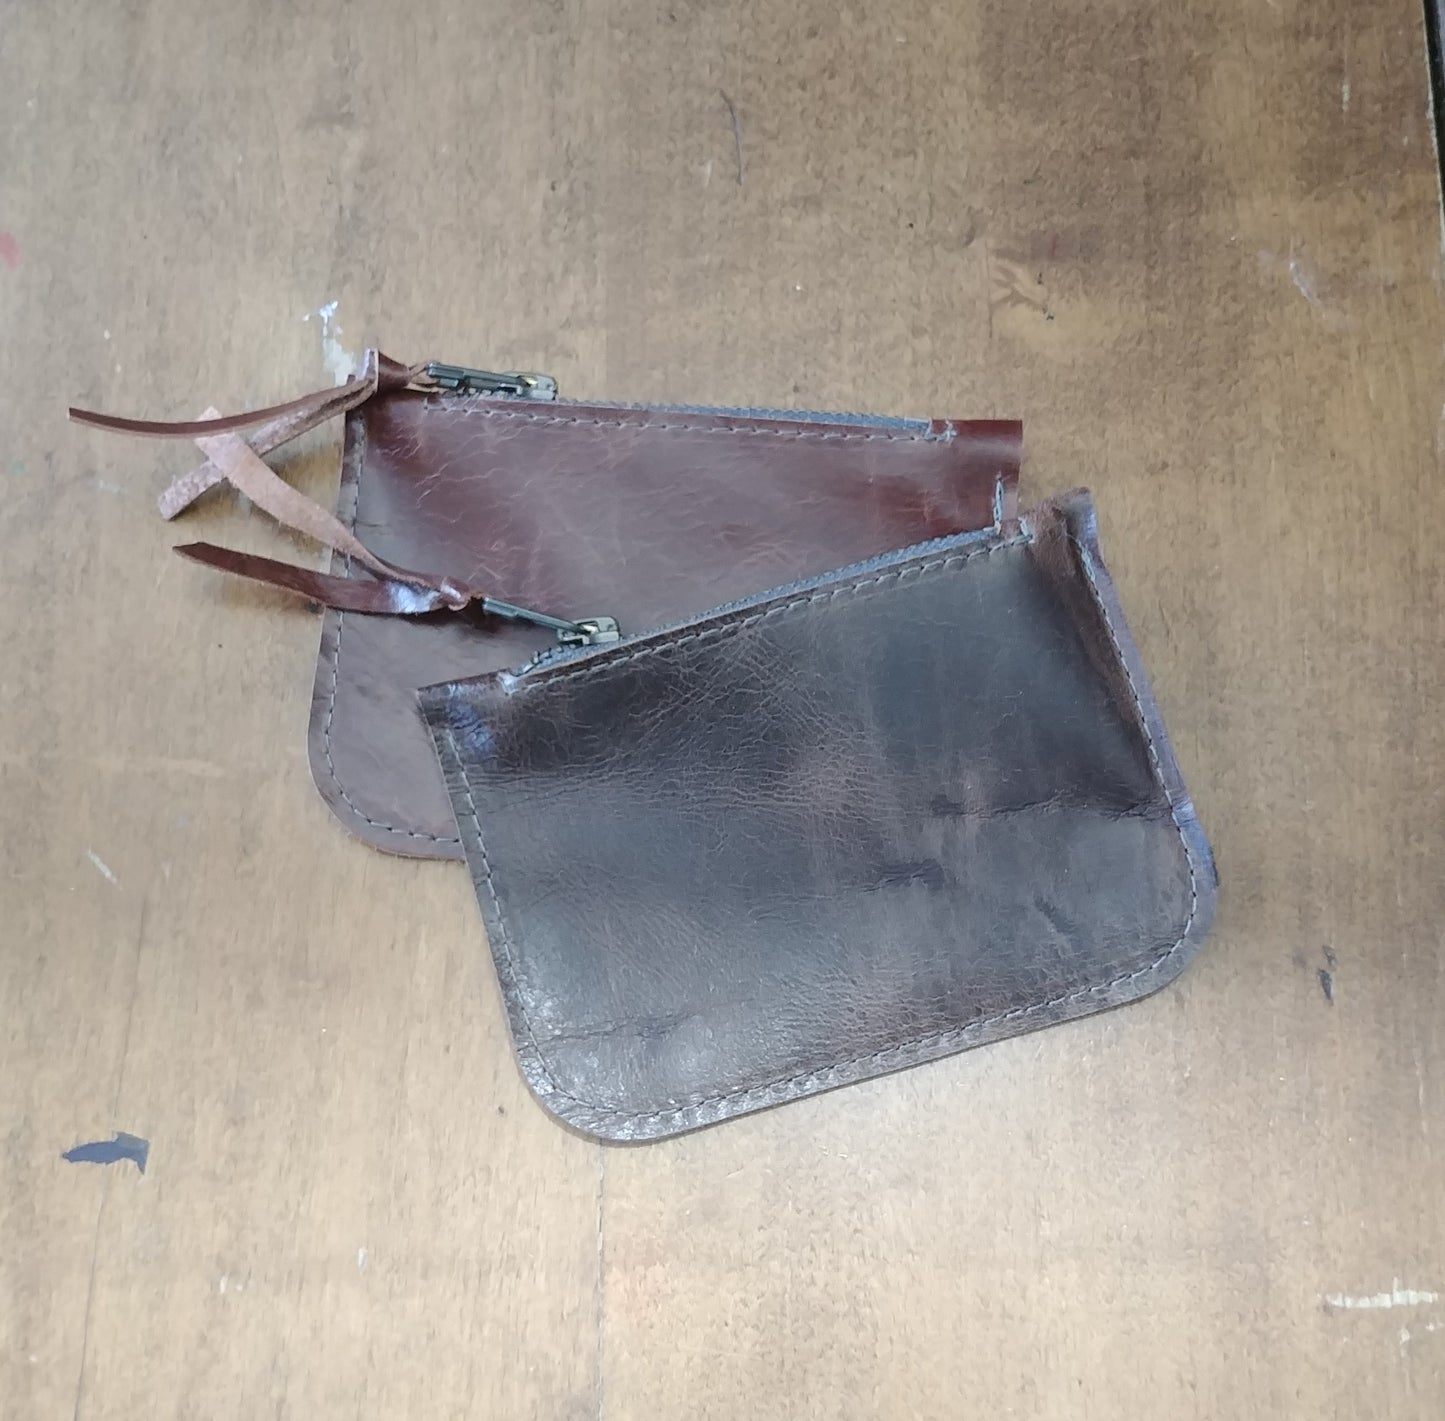 Leather Zippered Coin Purse or Card Case